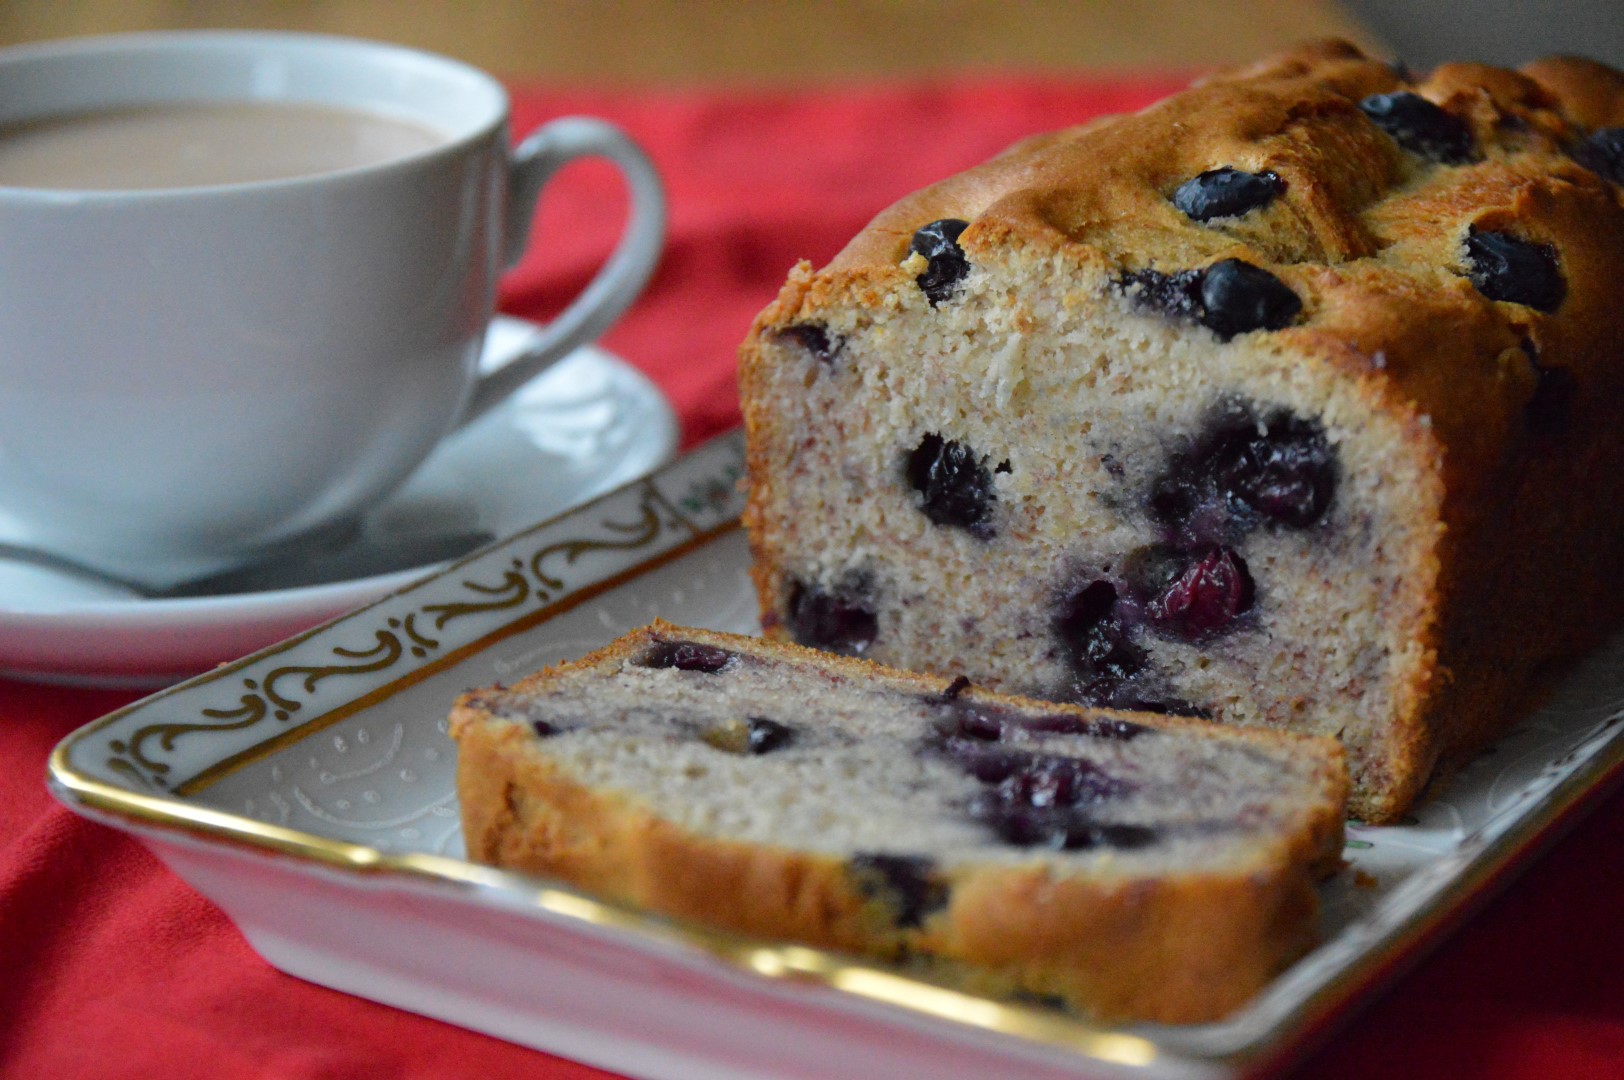 Blueberry tea loaf - dairy-free, gluten-free, wheat-free, egg-free, nut-free a delicious healthy treat for any time of the day! Allergy safe too! www.intolerantgourmand.com